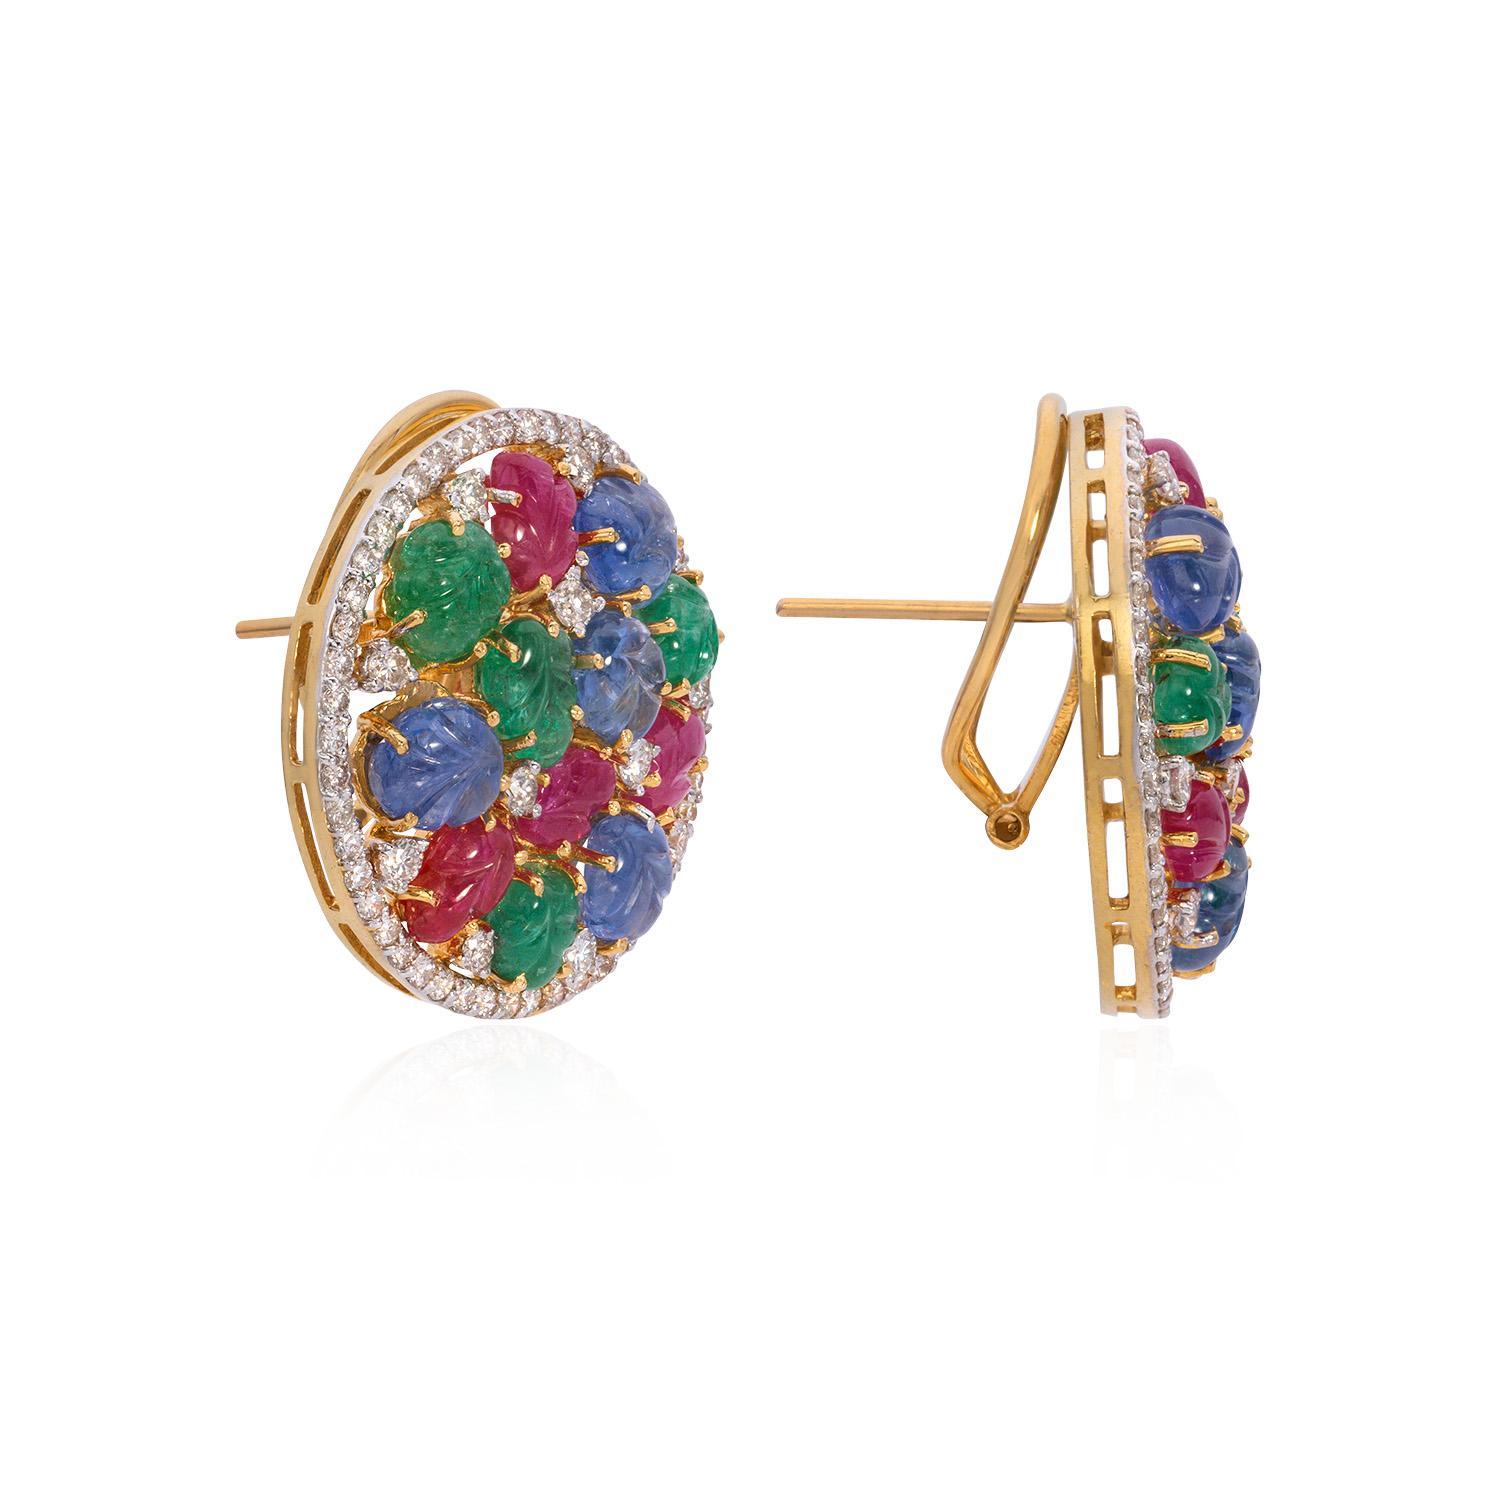 The Tutti Frutti Studs are the perfect addition to any jewelry collection. These colorful and fun studs feature a variety of fruits such as strawberries, pineapples, and watermelons embellished with sparkling gemstones. 

Crafted from high-quality